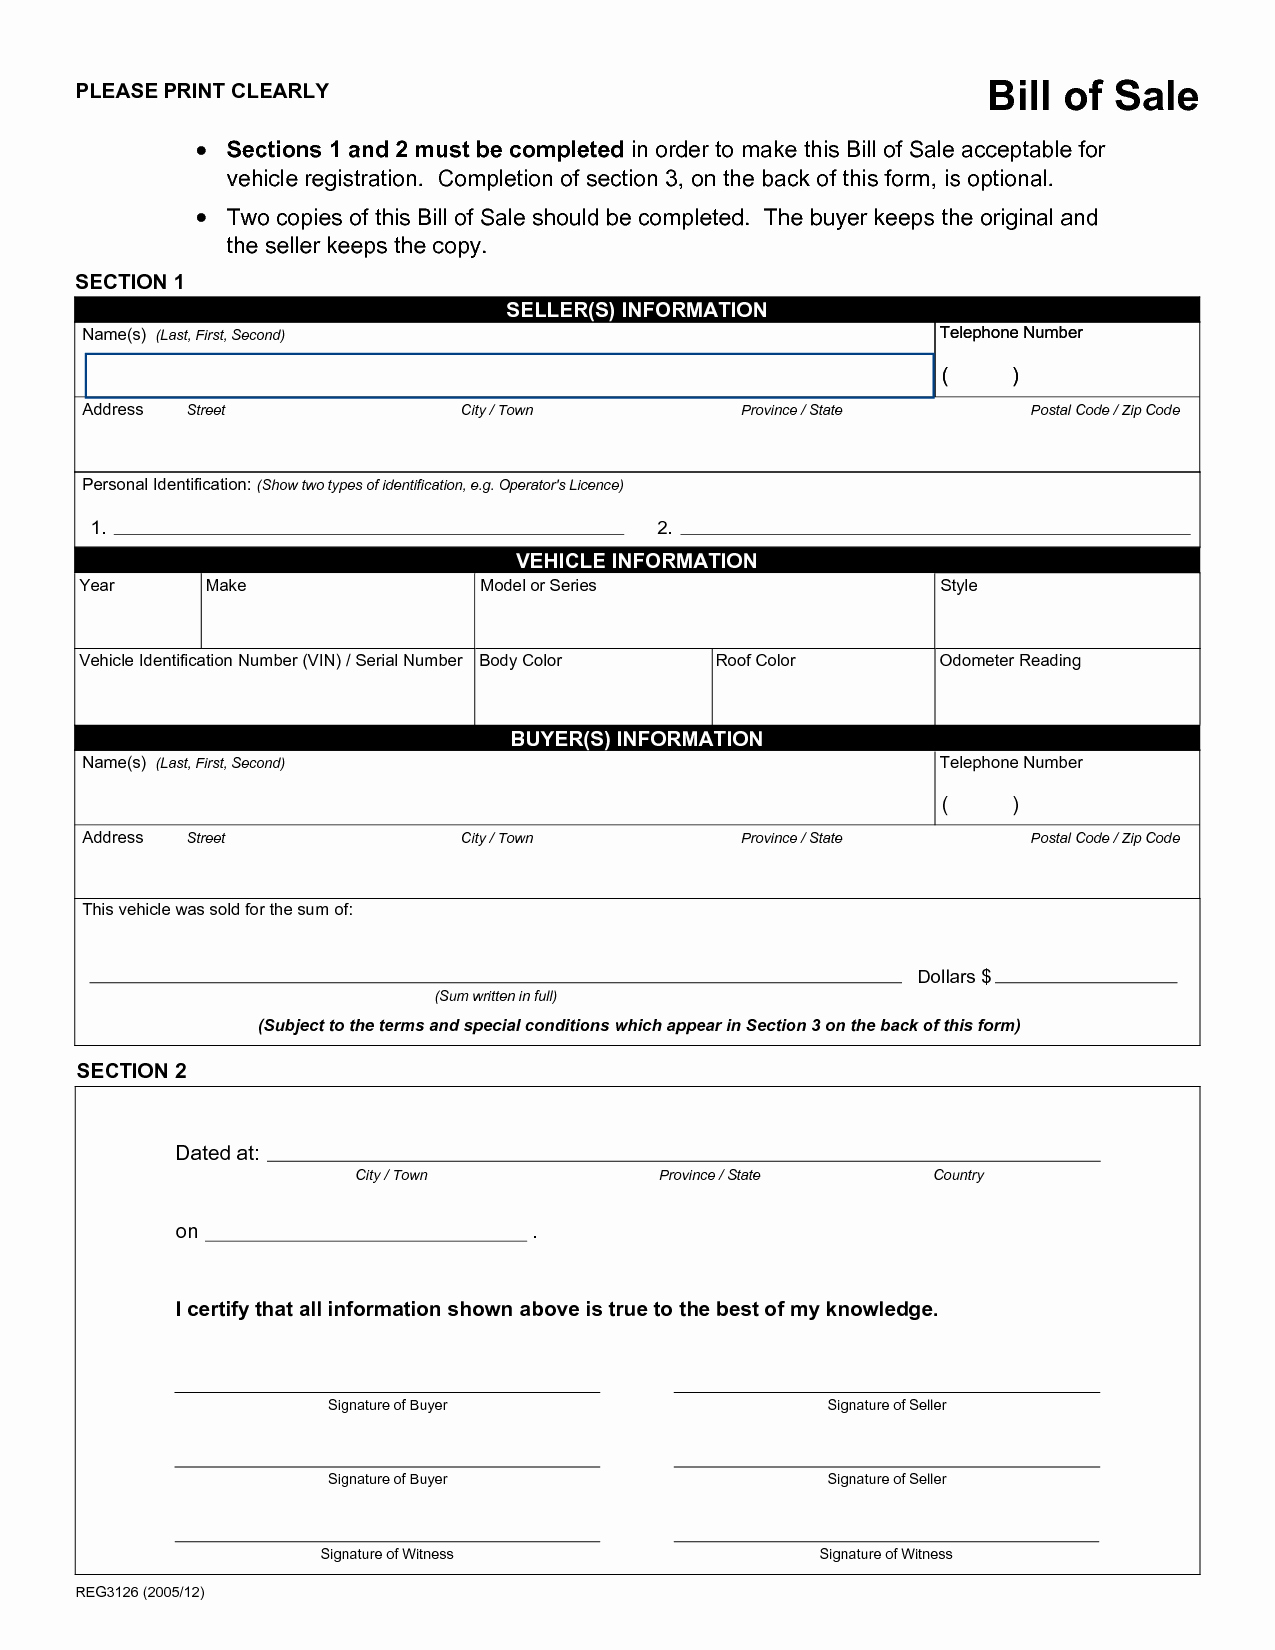 Free forms Bill Of Sale Lovely Free Printable Rv Bill Of Sale form form Generic